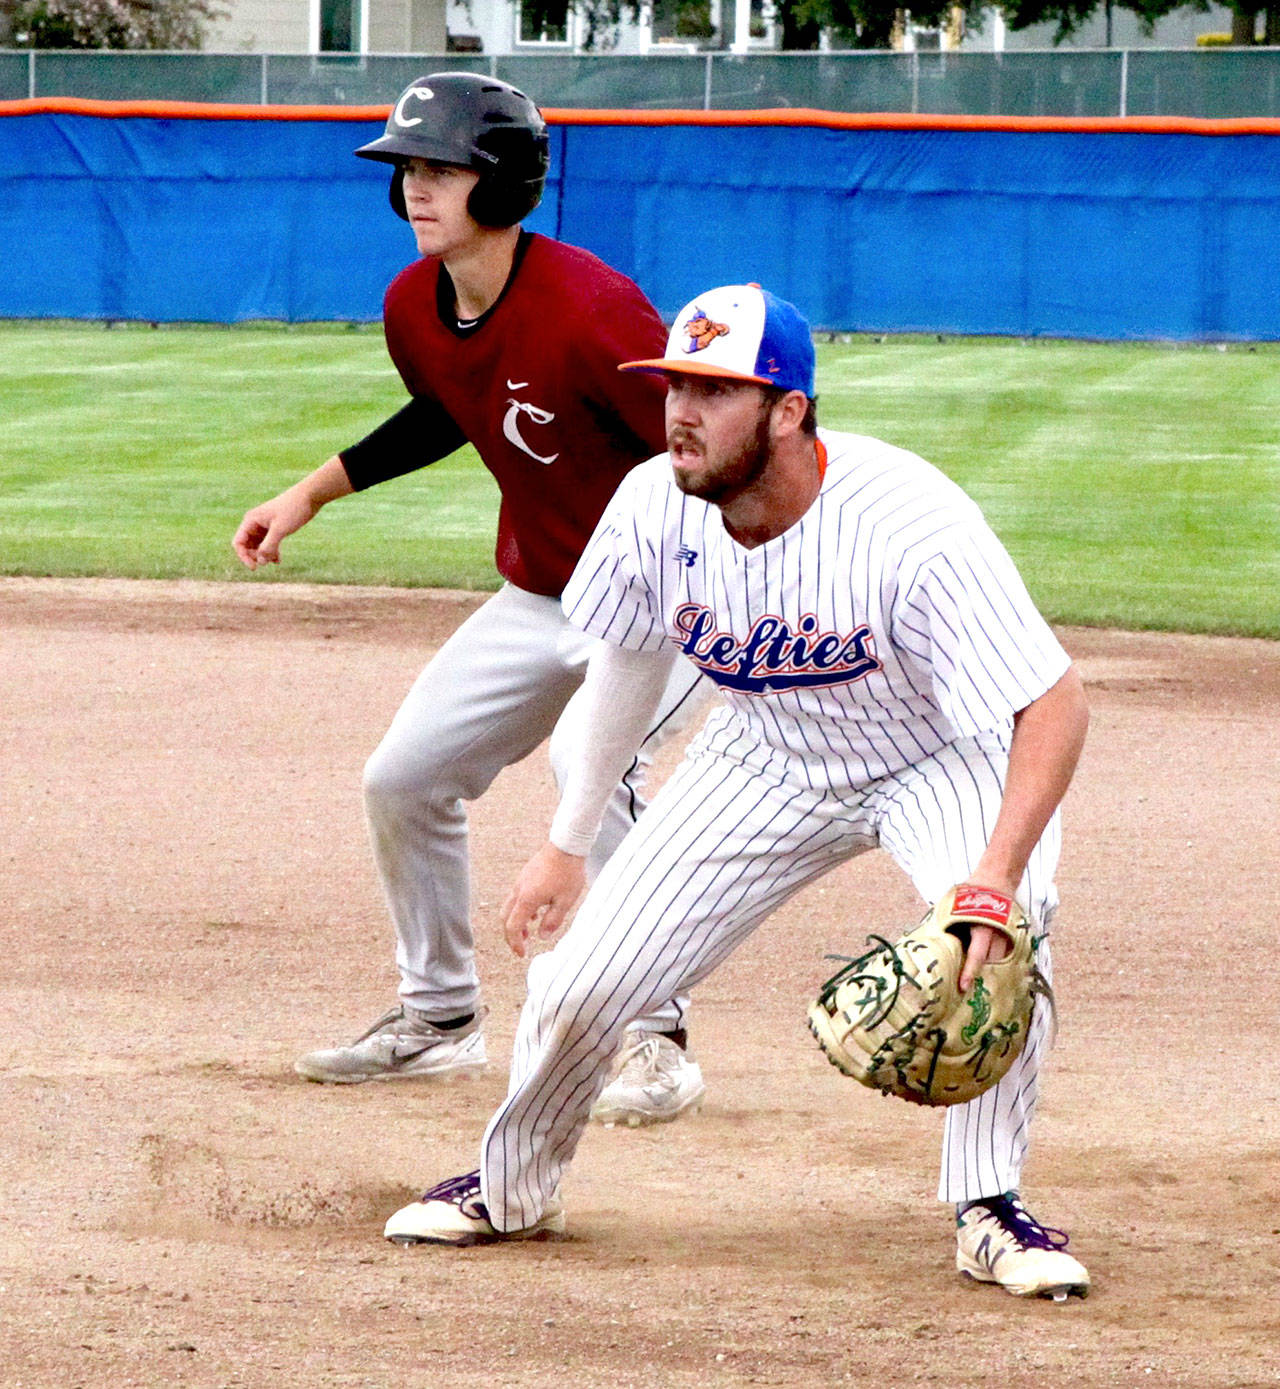 Dave Logan/for Peninsula Daily News Lefties’ first baseman Kyle Schimpf, who is hitting .323 on the season, will be one of four Lefties playing in the West Coast League All-Star game, being held at 6:30 p.m. Tuesday at Civic Field.